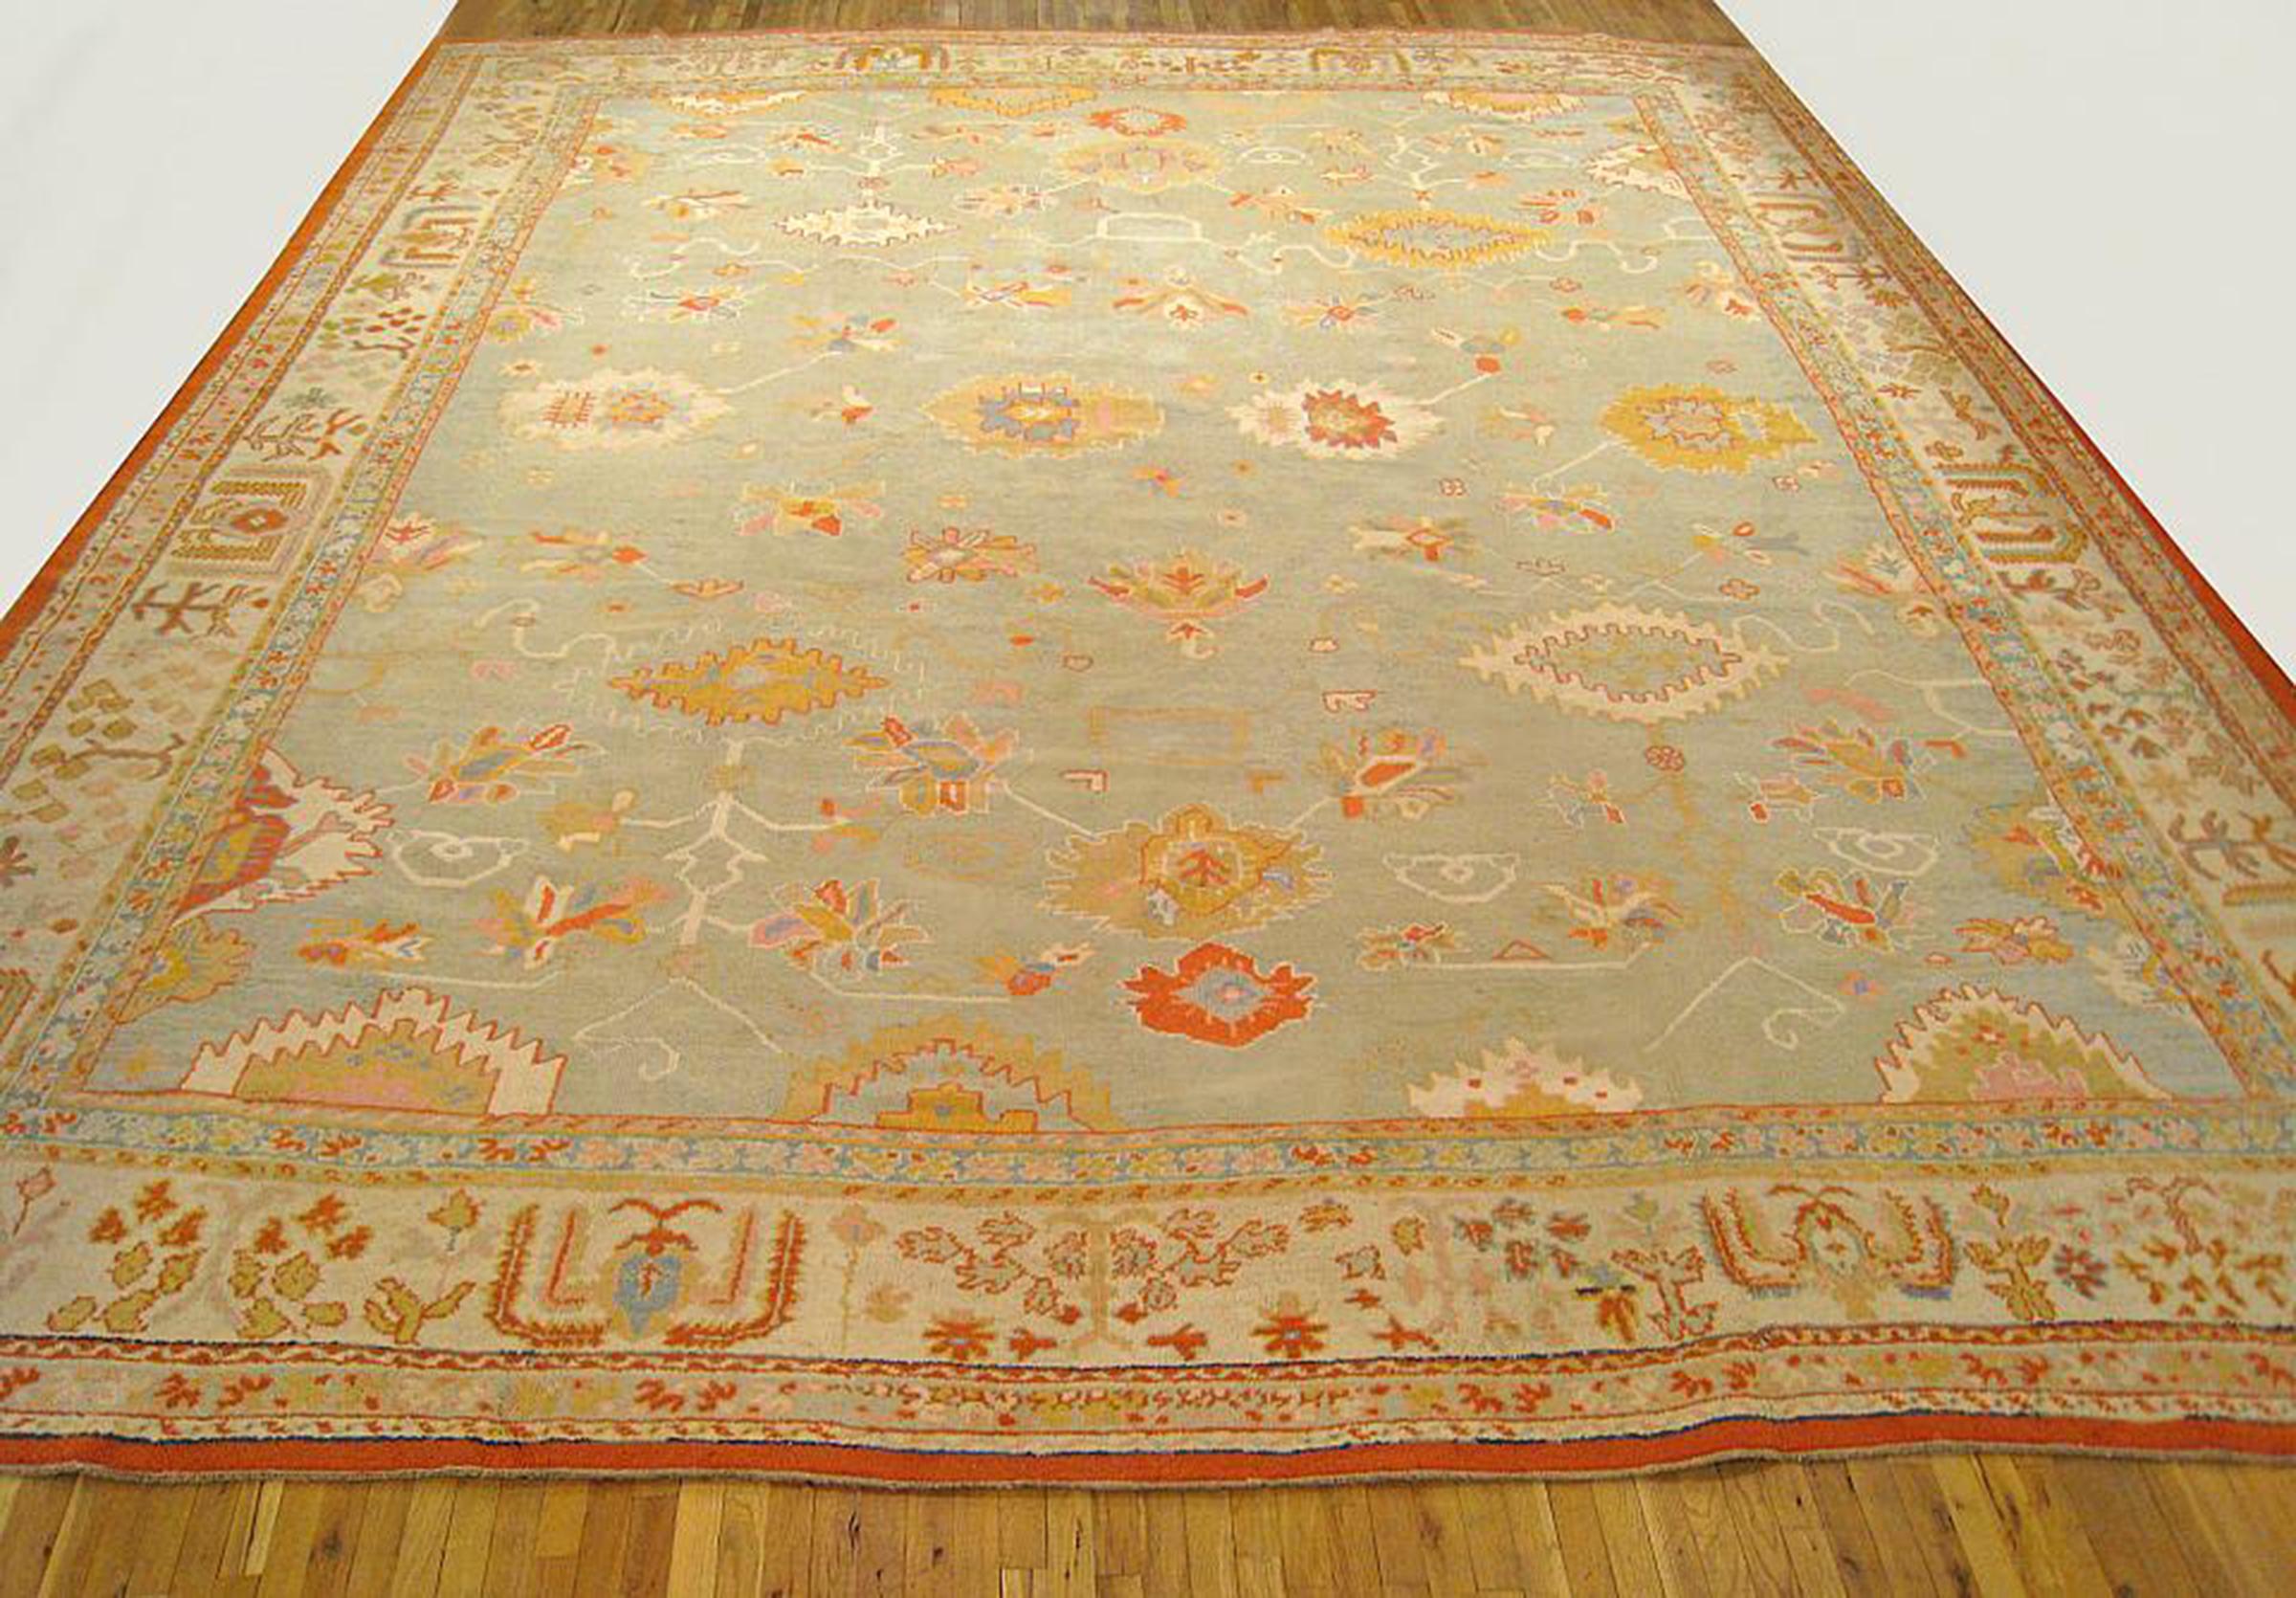 A large squarish antique Turkish Oushak carpet, circa 1910, size 18'2 x 16'0. This handsome carpet features a simple geometric design on the sparsely decorated soft blue-green field, and an ivory border with elements of floral sprays, cypress trees,